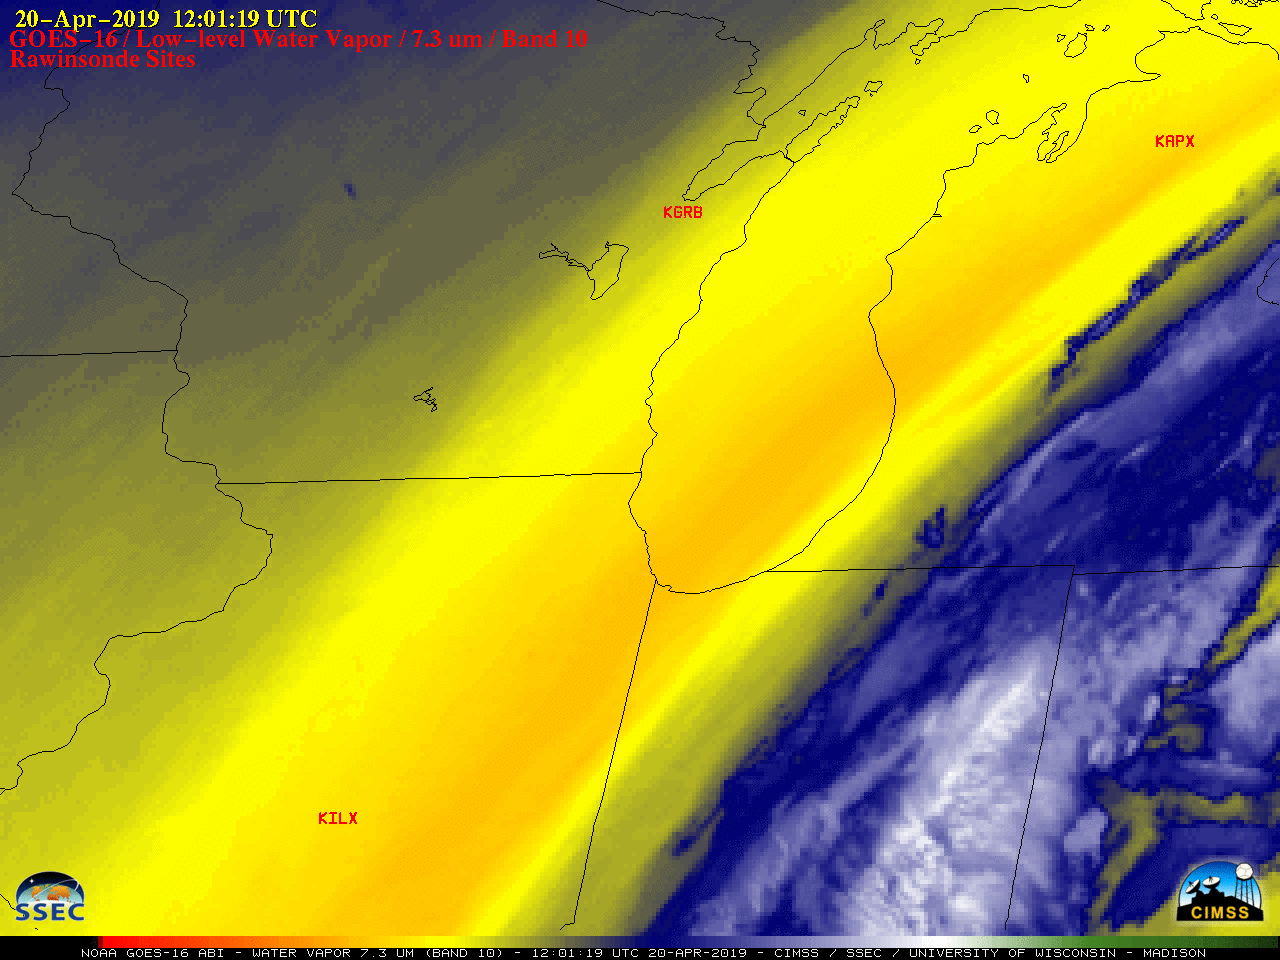 GOES-16 Low-level Water Vapor (7.3 µm) image, with plots of rawinsonde sites [click to enlarge]